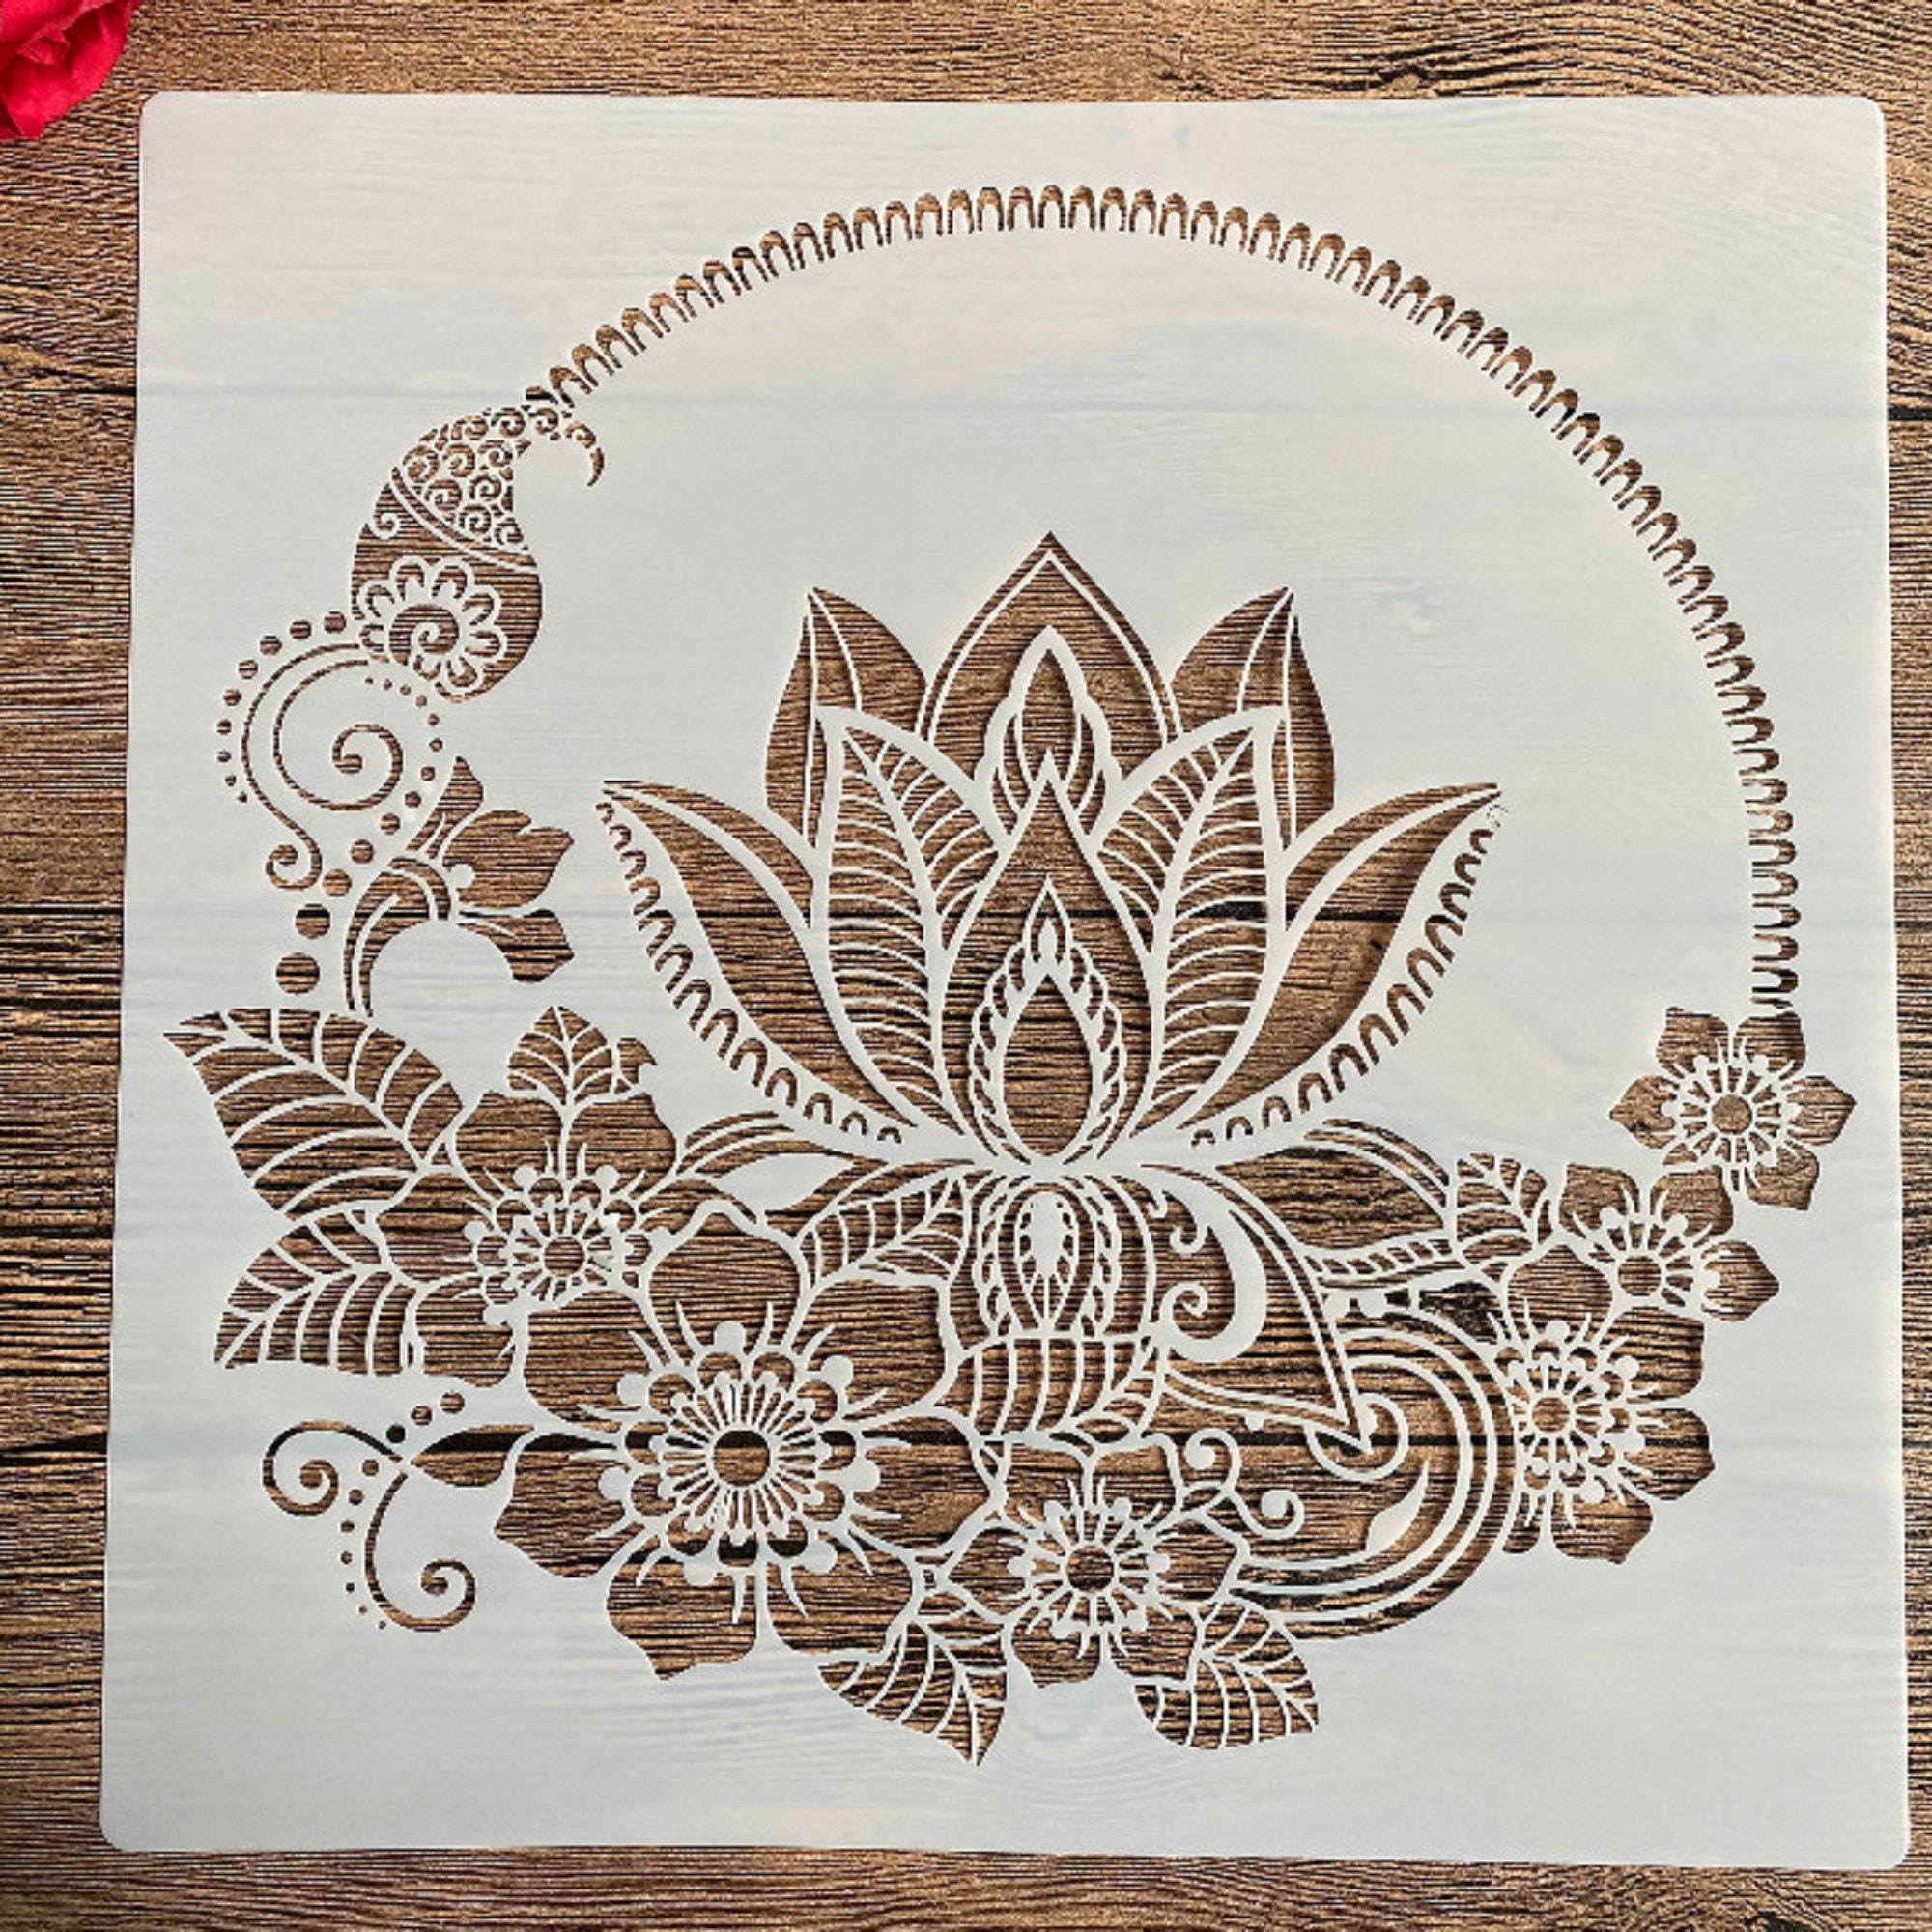 Mandala Stencil Reusable Stencil for Painting Floors and Walls